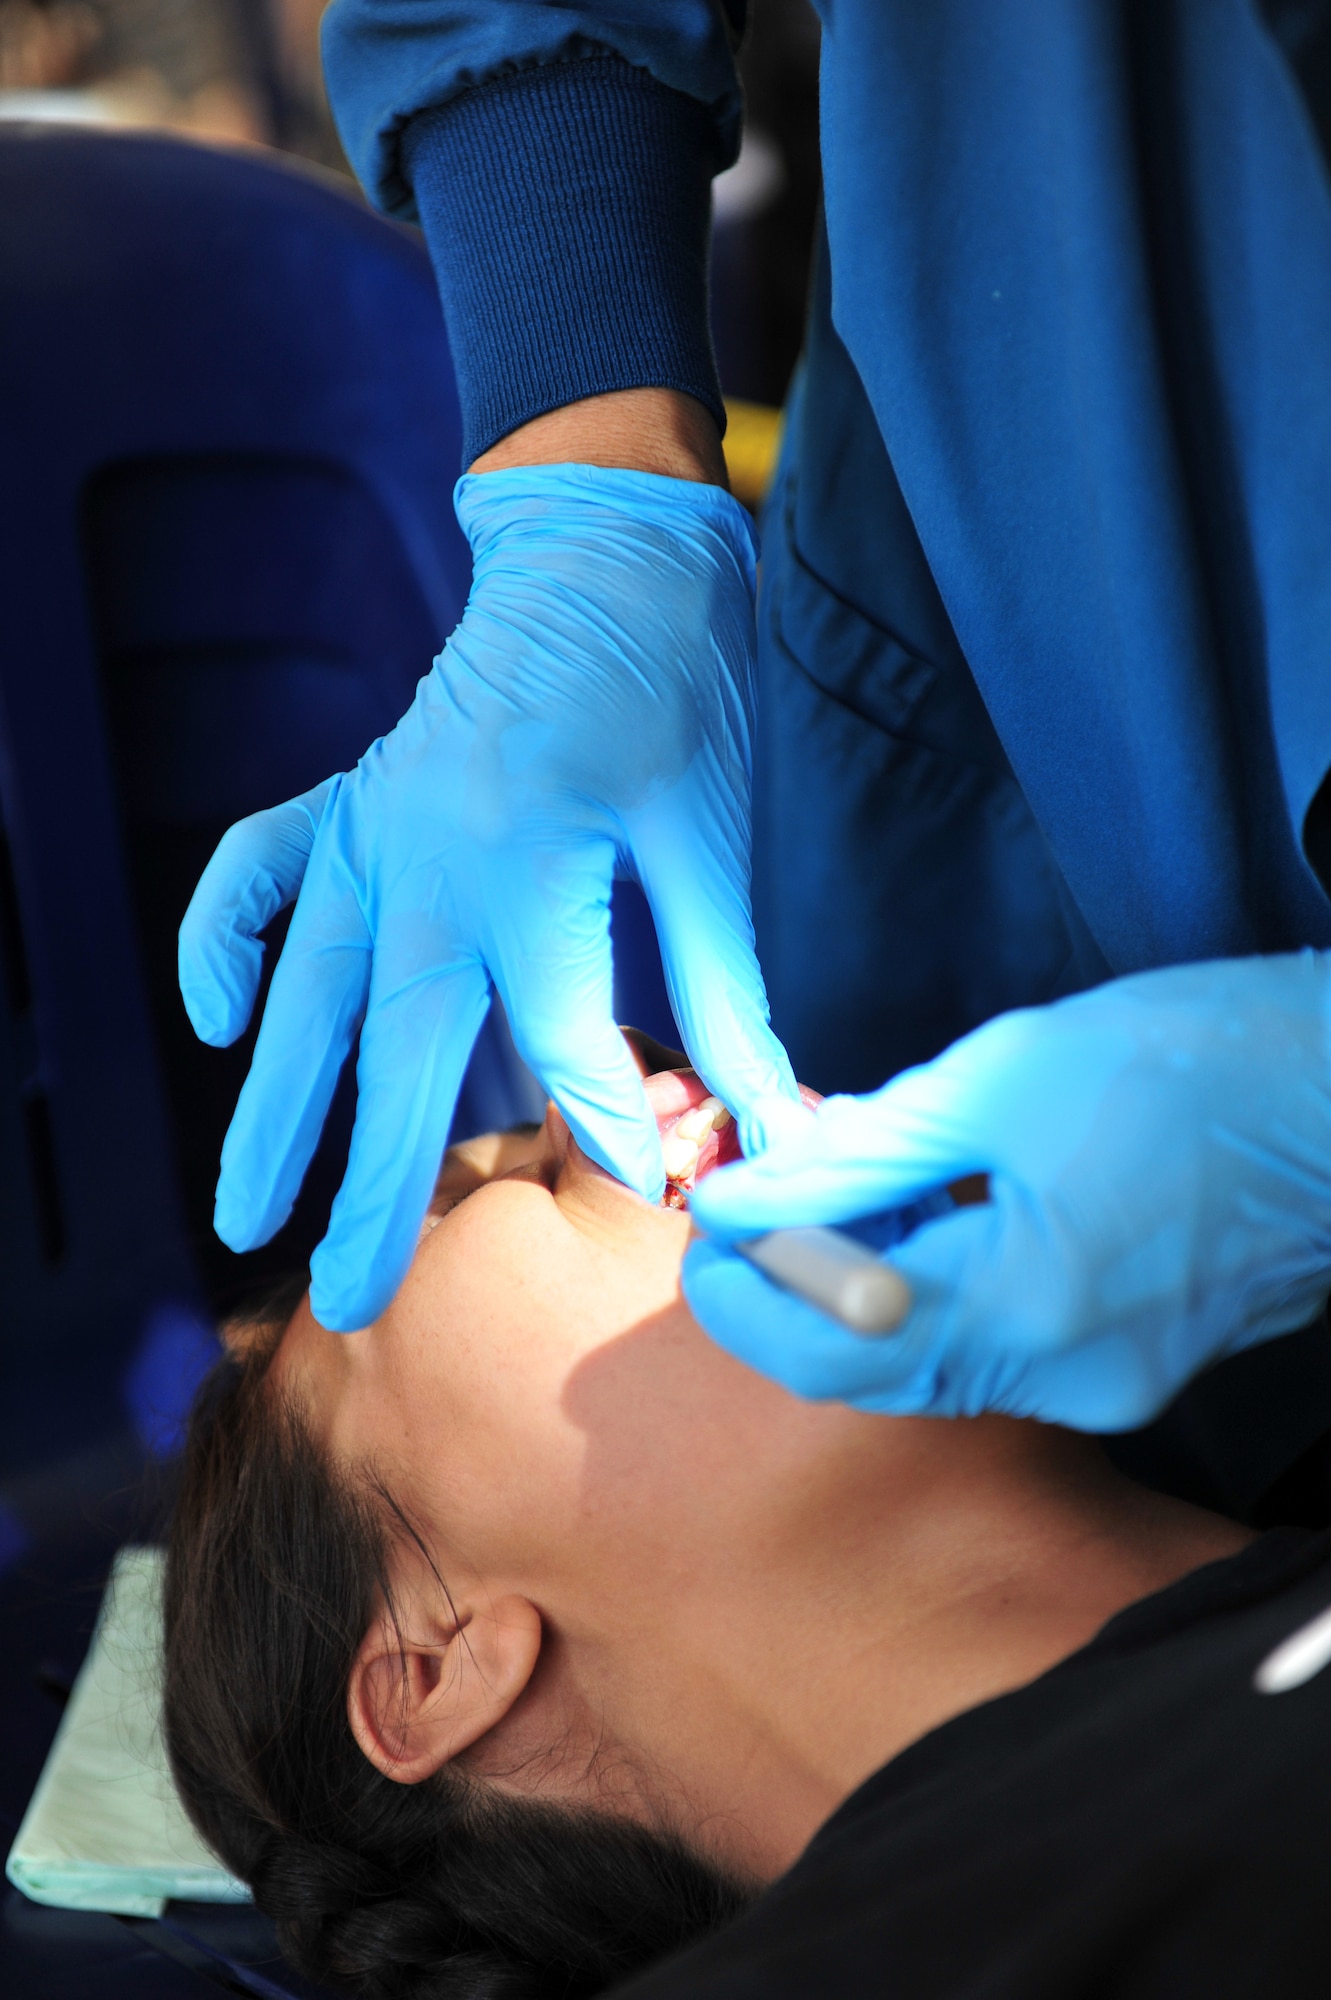 Lt. Col. Catherine Kanwetz  performs an extraction July 22, 2014, in Neiafu, Tonga. Pacific Angel-Tonga includes general health, dental, optometry, pediatrics, and engineering programs as well as various subject-matter expert exchanges. Kanwetz is deployed from the 152nd Air Base, Reno, Nev., and is the PACANGEL-Tonga lead dentist. (U.S. Air Force photo/Staff Sgt. Rachelle Coleman)